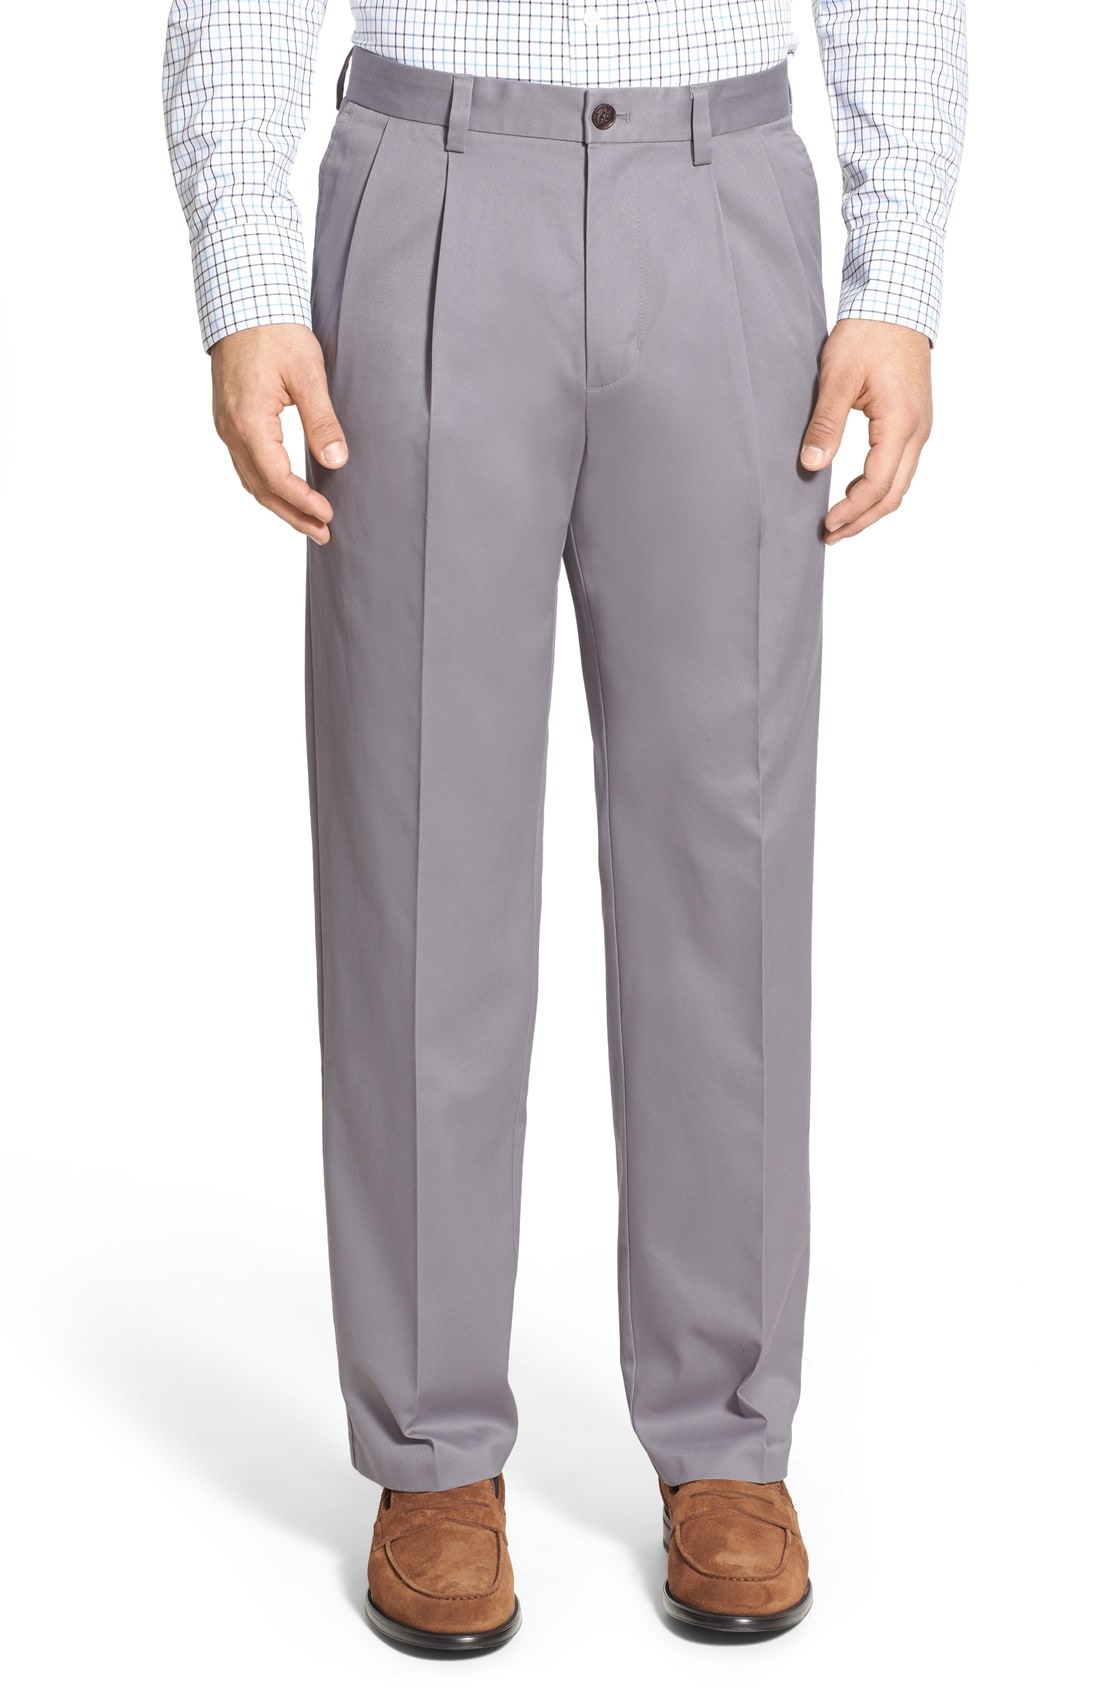 Nordstrom Men's Shop 'Classic' Smartcare Relaxed Fit Double Pleated Cotton Pants (Online Only)